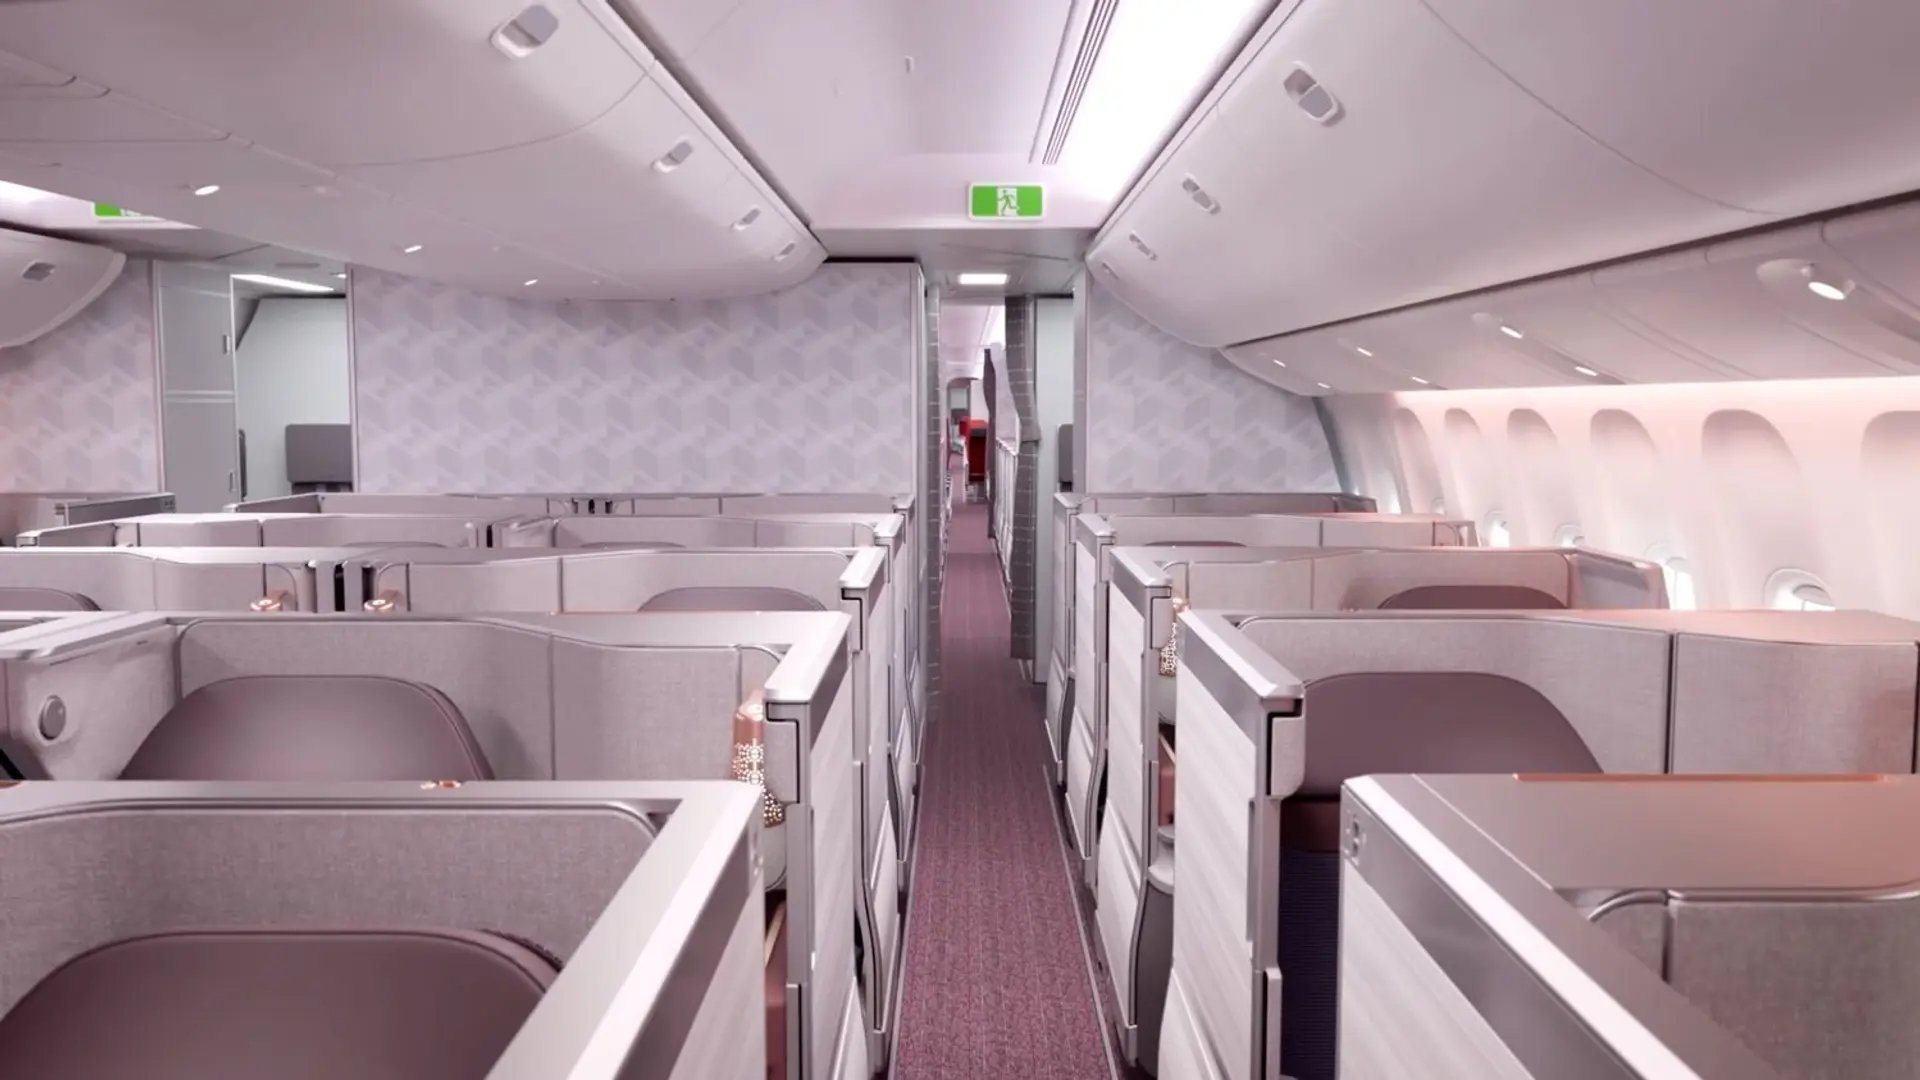 Airlines News - Air India unveils new premium cabins, livery & logo